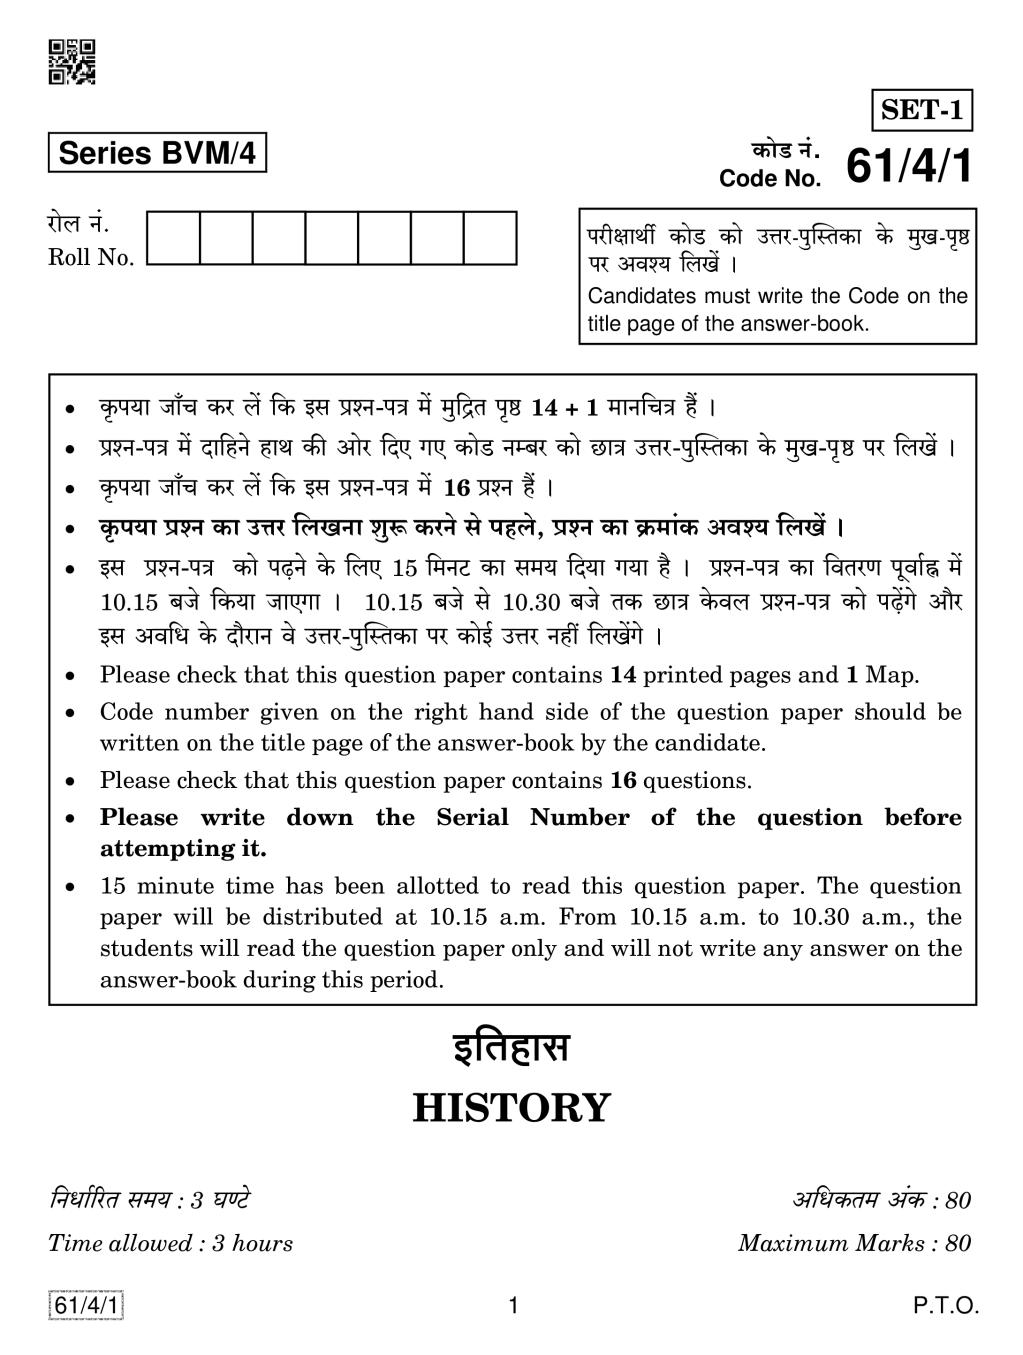 CBSE Class 12 History Question Paper 2019 Set 4 - Page 1